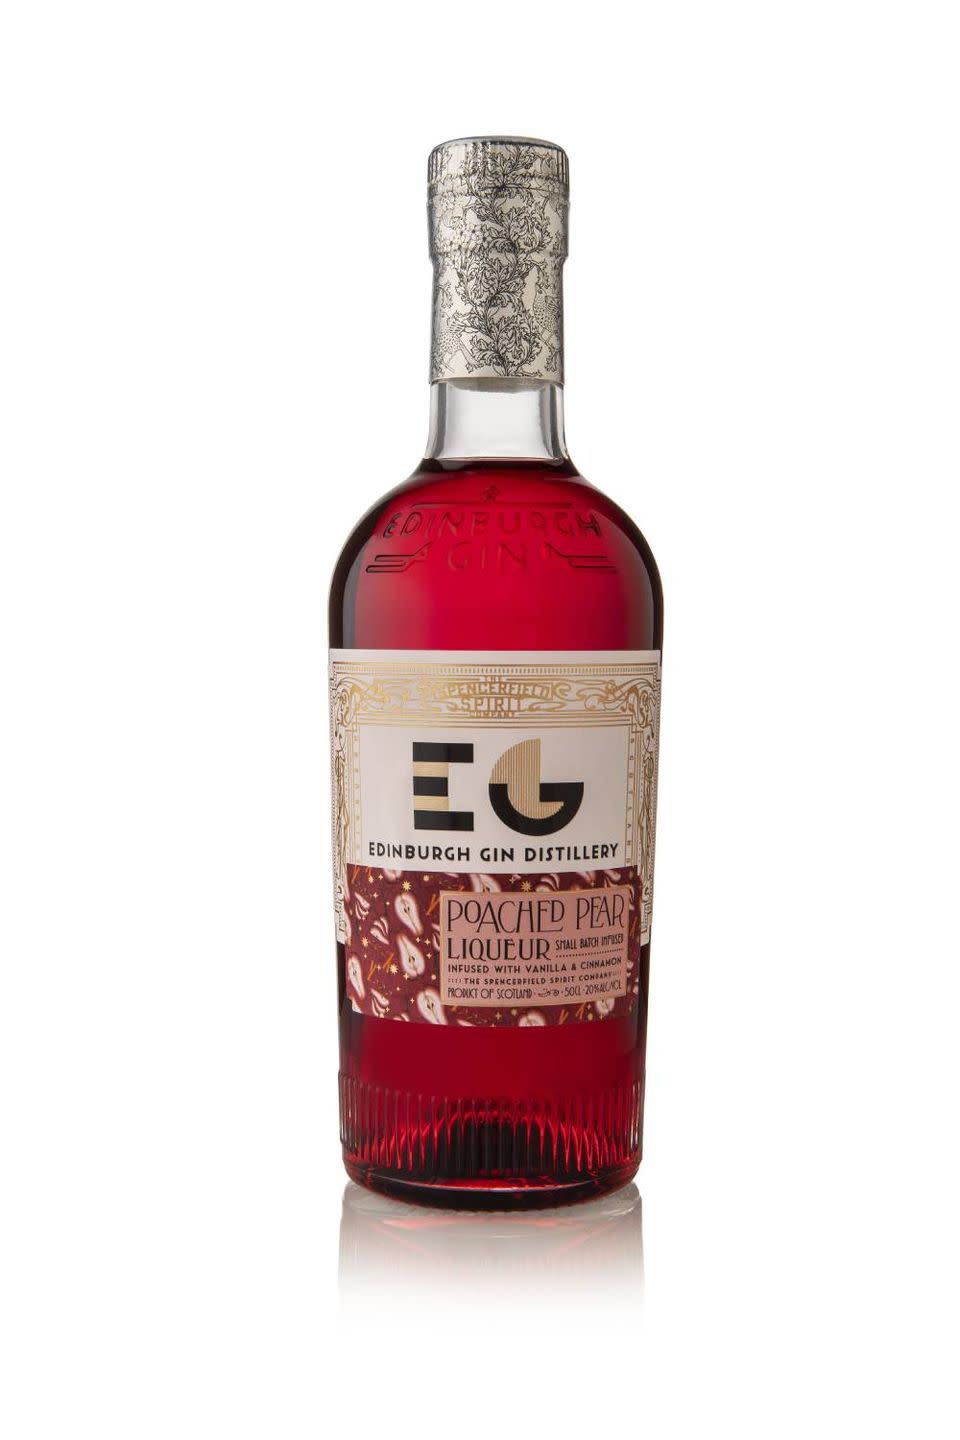 <p>Available online or at John Lewis, kick off the festive period with Edinburgh Gin's new Poached Pear Liqueur, which is full of flavours like sweet pear, delicate red wine, and cinnamon. We're already feeling more Christmassy.</p><p><a class="link " href="https://www.edinburghgin.com/shop/gins/poached-pear-gin-liqueur" rel="nofollow noopener" target="_blank" data-ylk="slk:SHOP NOW">SHOP NOW</a></p>